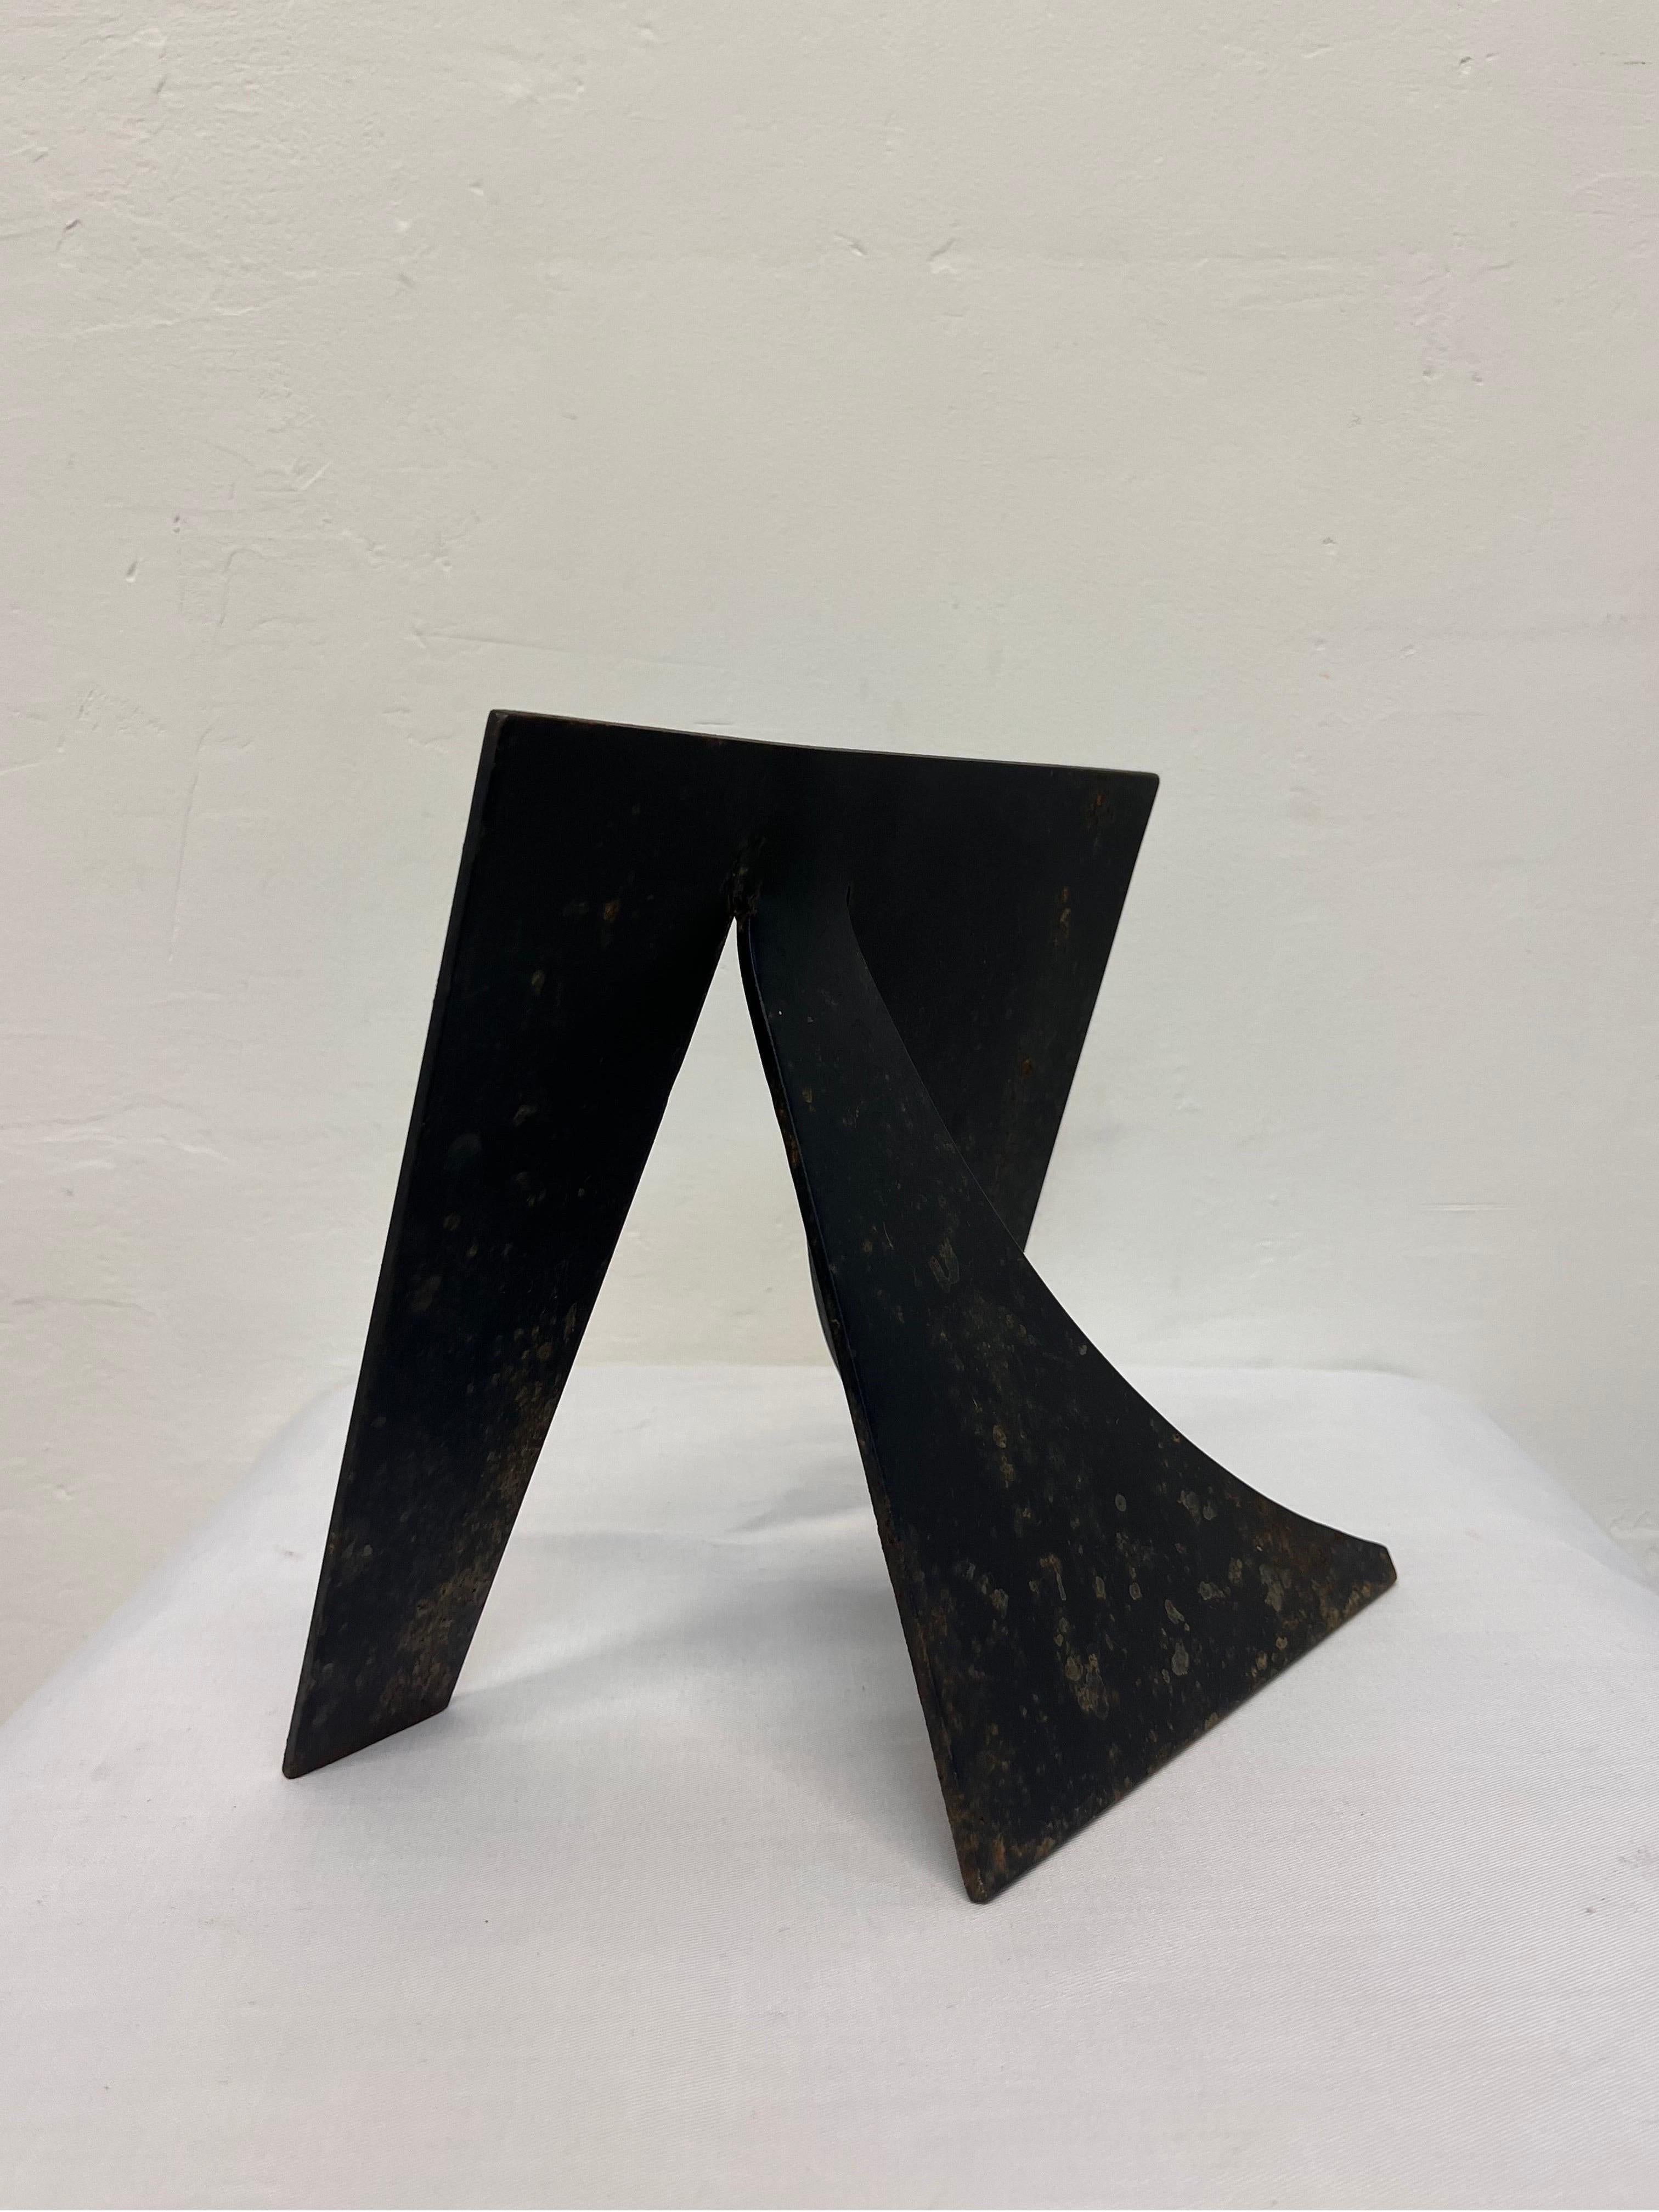 Brazilian Modern Black Steel Abstract Table Sculpture, 1980s For Sale 2